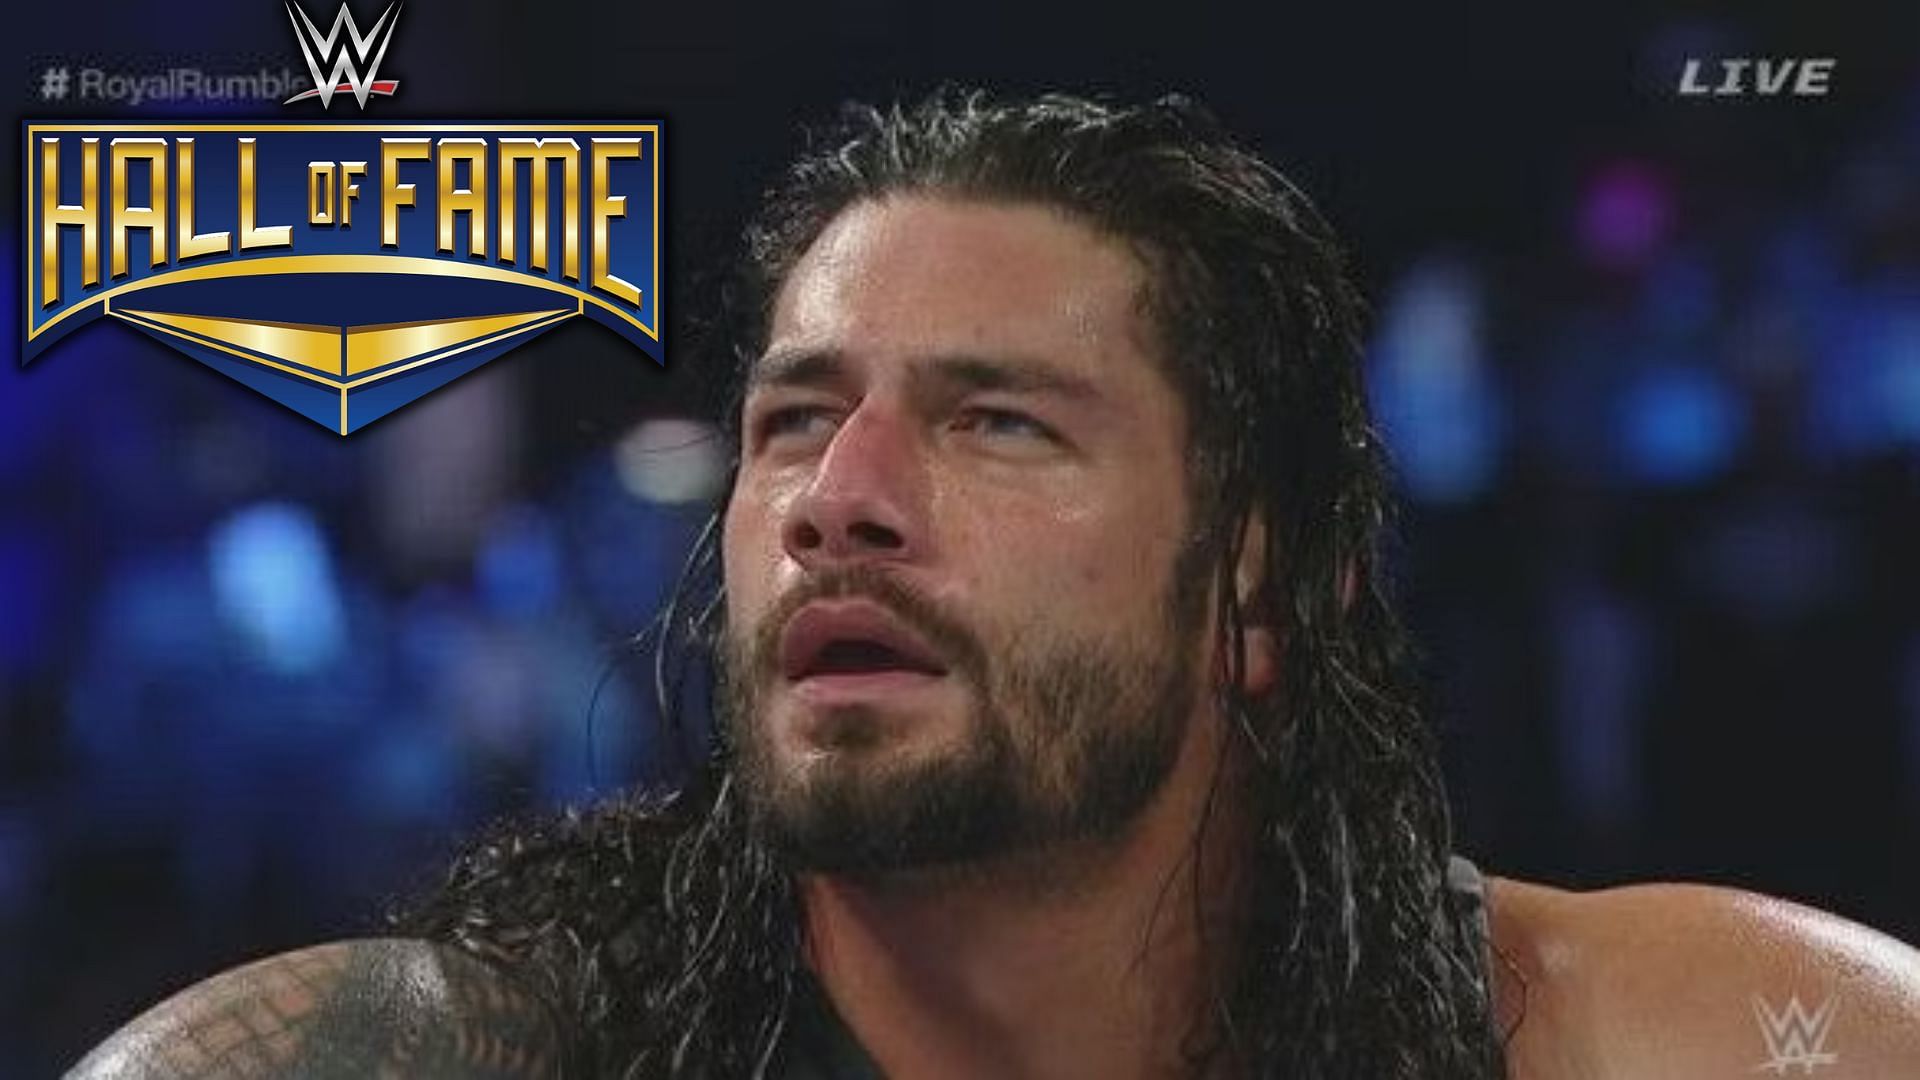 What does Roman Reigns have in common with this controversial legend?